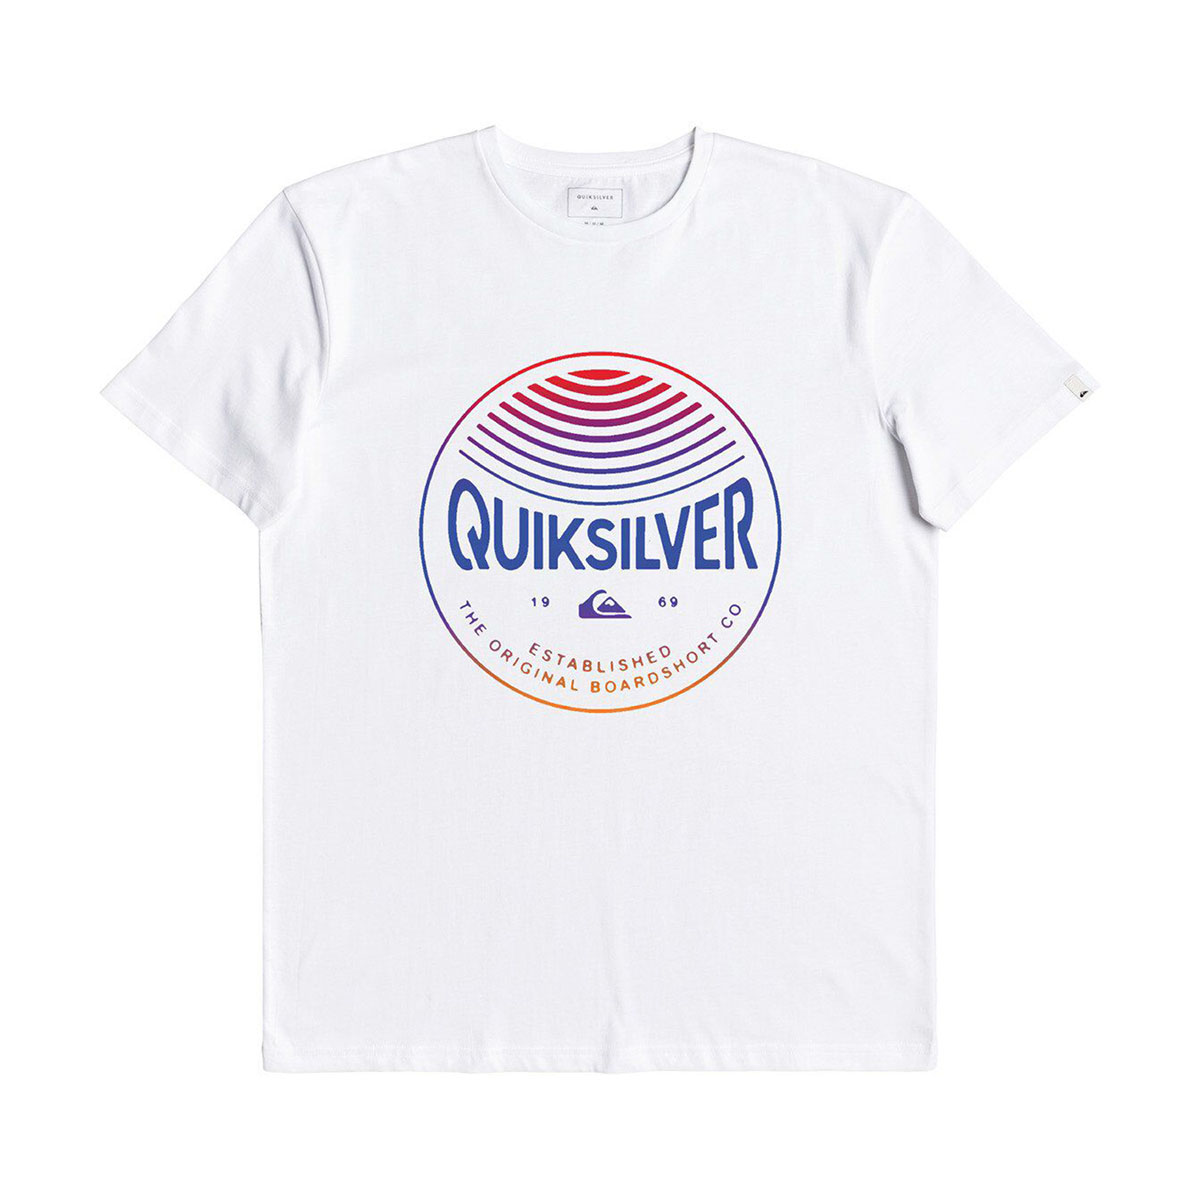 QUIKSILVER - COLORS IN STEREO